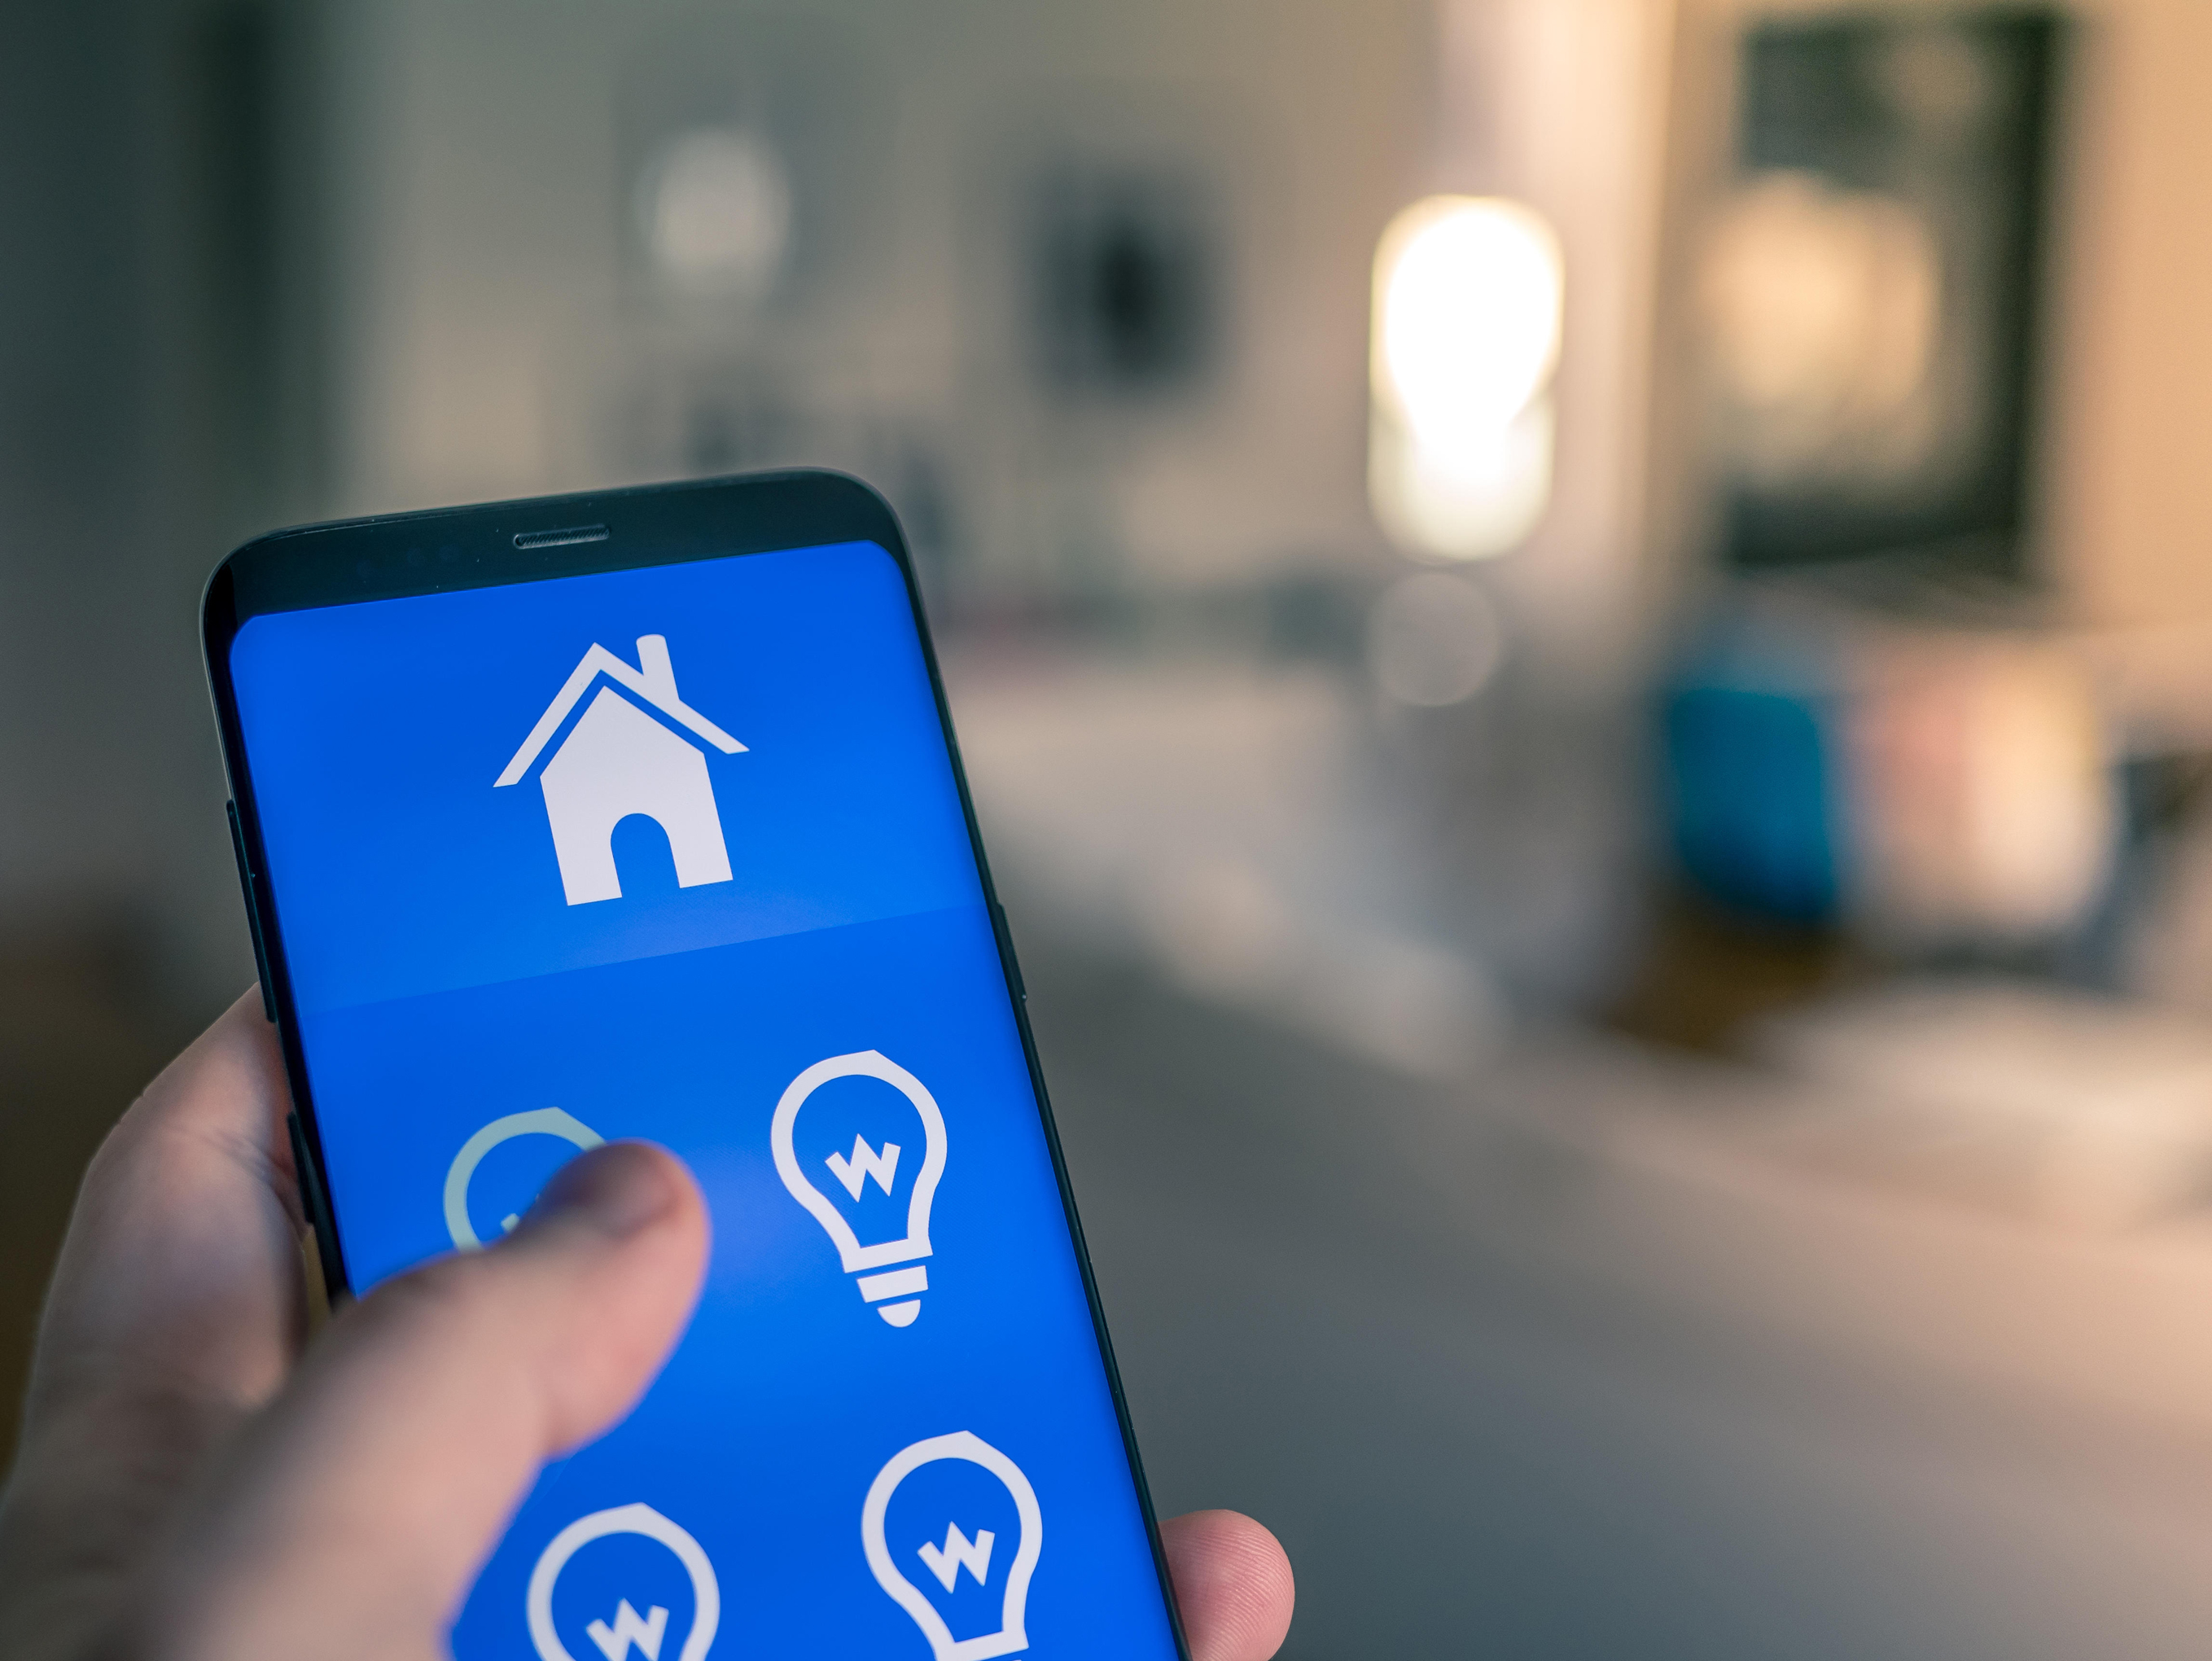 Smart home automation, mobile device